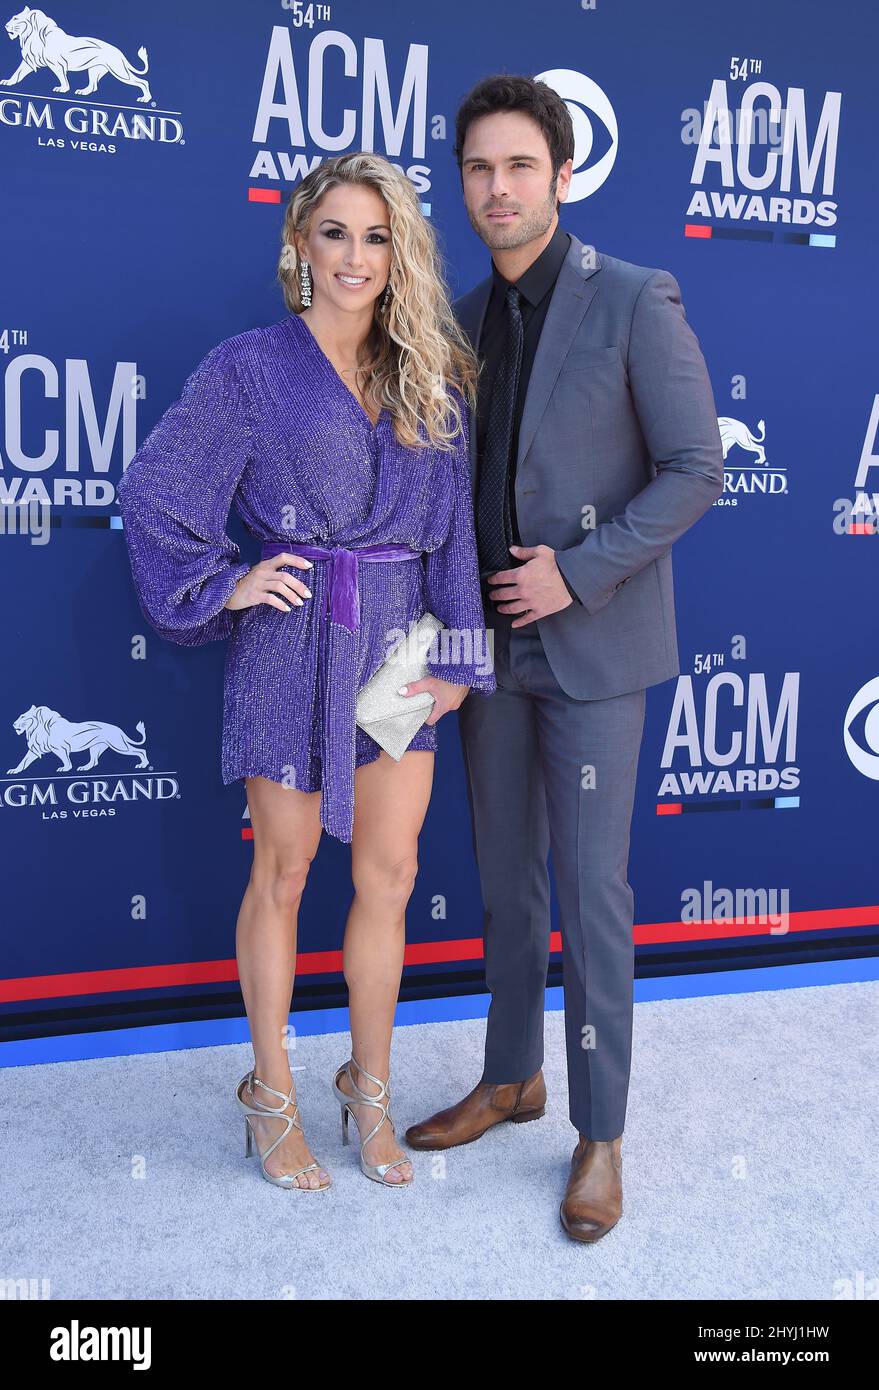 Chuck Wick and Kasi Williams at the 54th Academy of Country Music Awards held at the MGM Grand Garden Arena in the MGM Grand Hotel & Casino on April 7, 2019 in Las Vegas, NV. Stock Photo